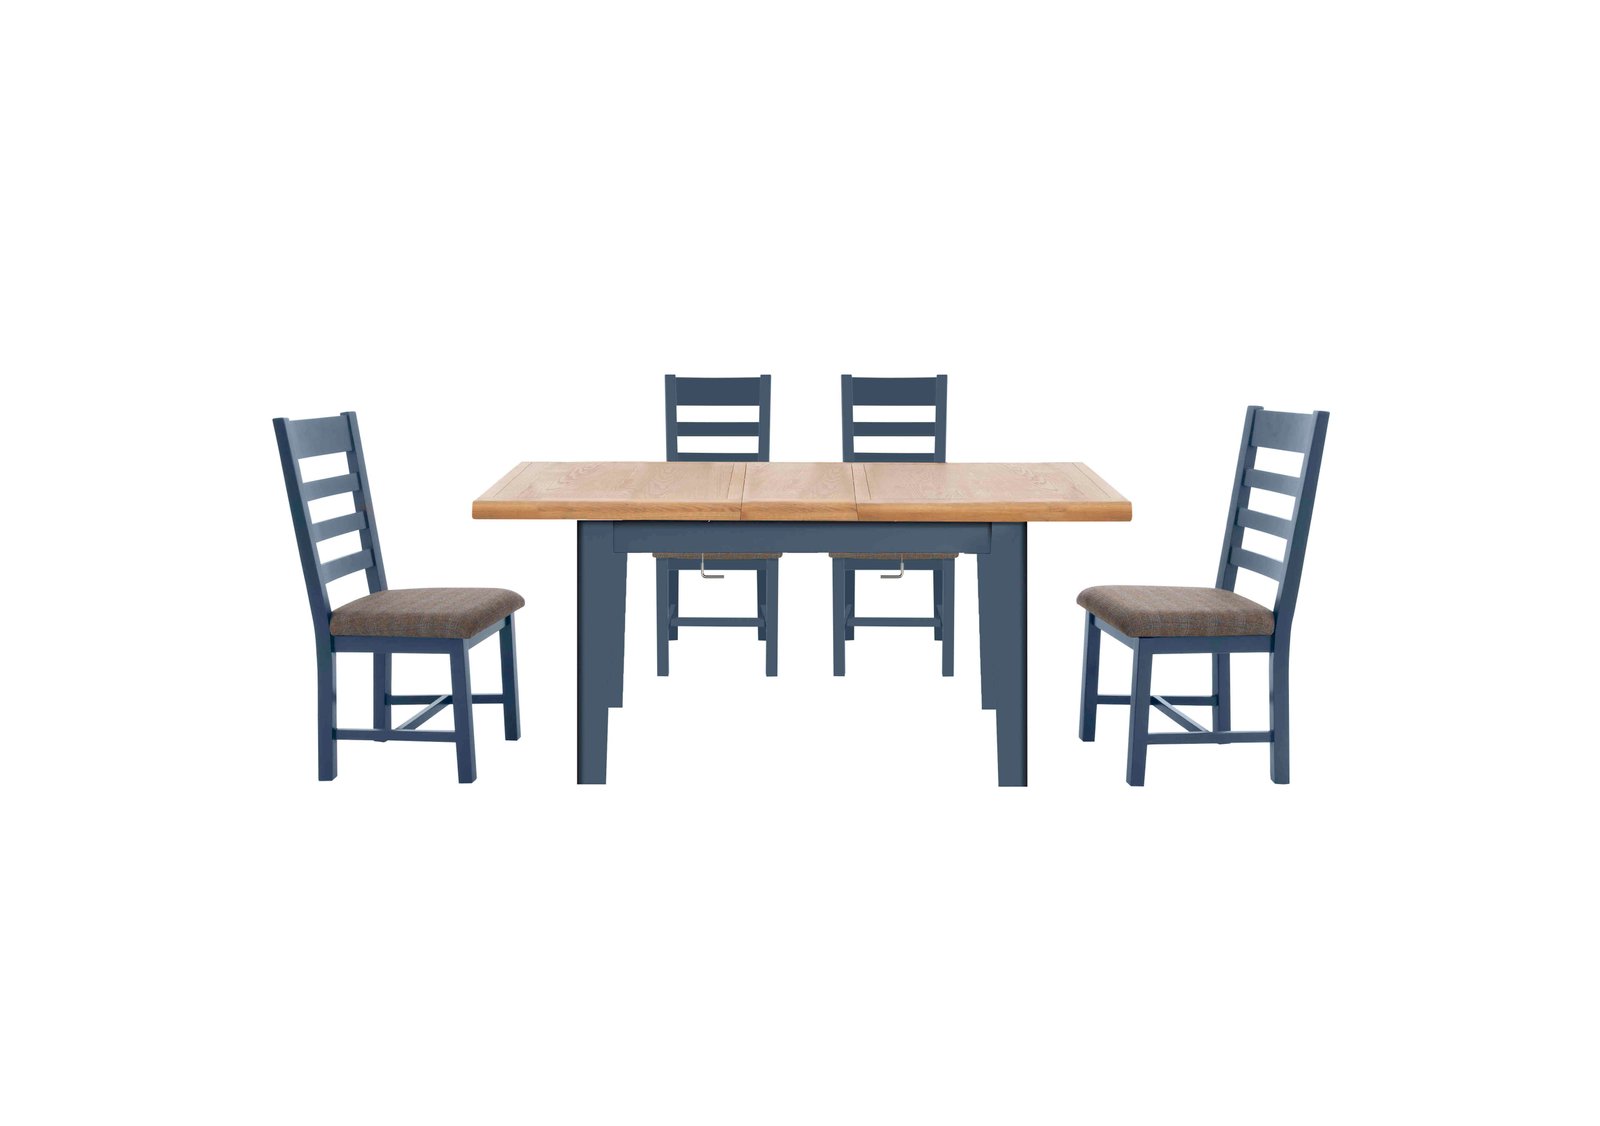 Hewitt Rectangular Dining Table and 4 Slatted Dining Chairs in Blue / New York Midnight on Furniture Village